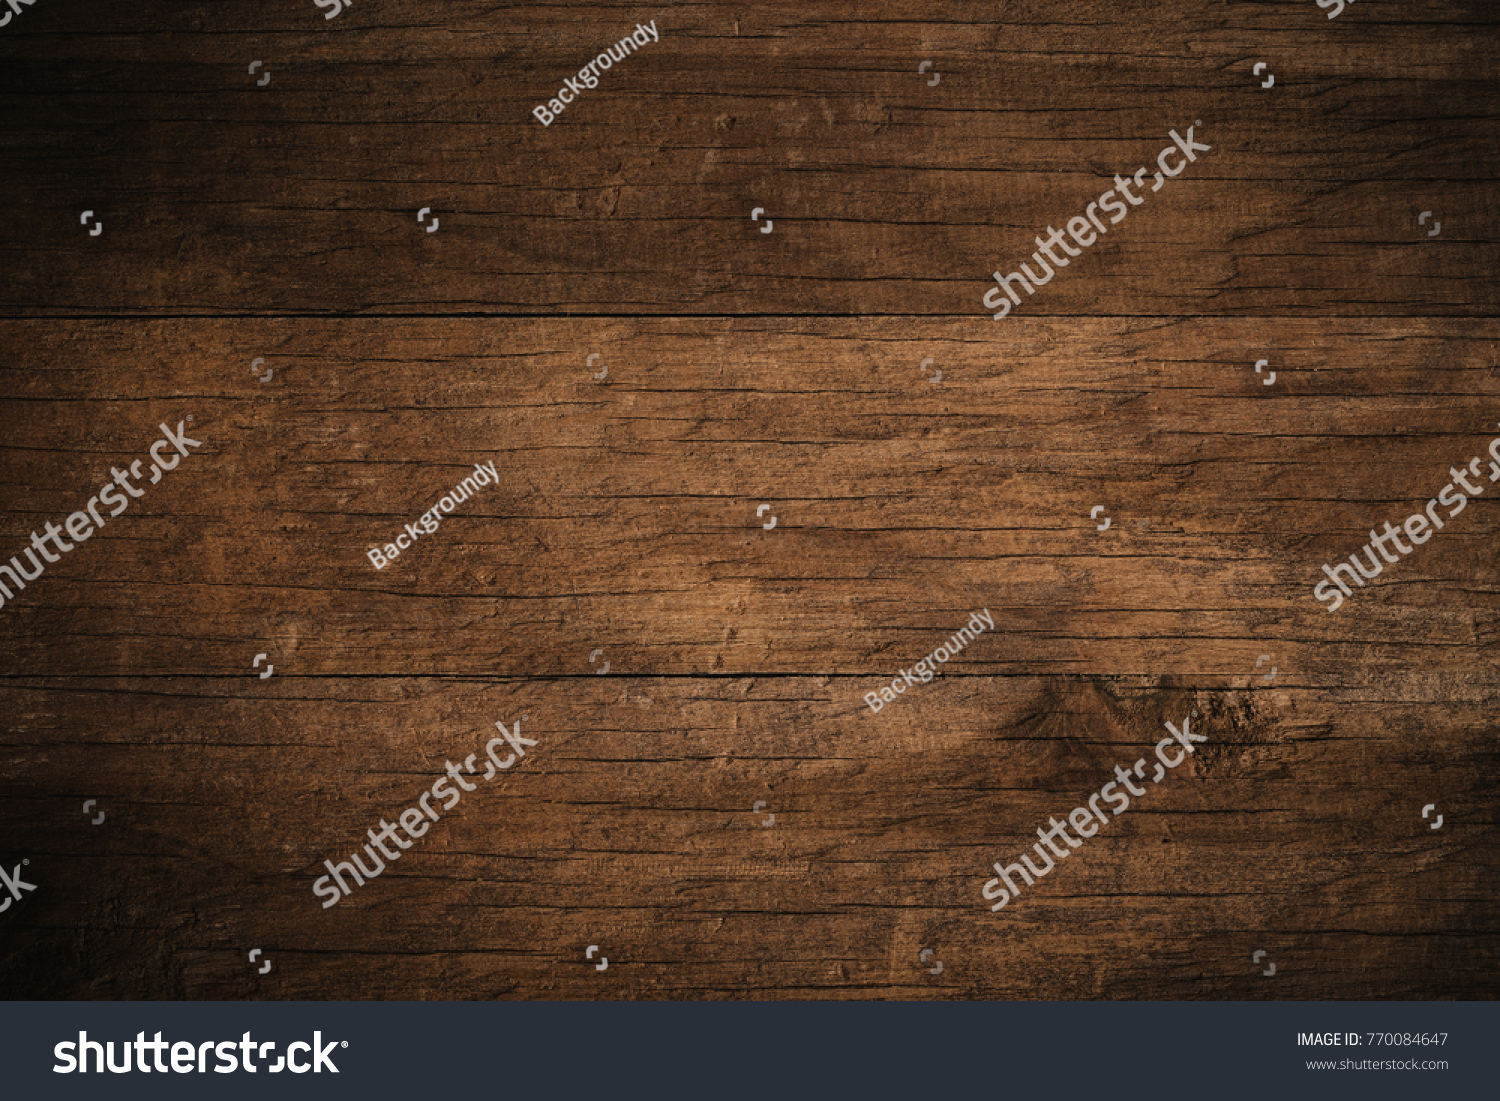 Old grunge dark textured wooden background,The surface of the old brown wood texture #770084647